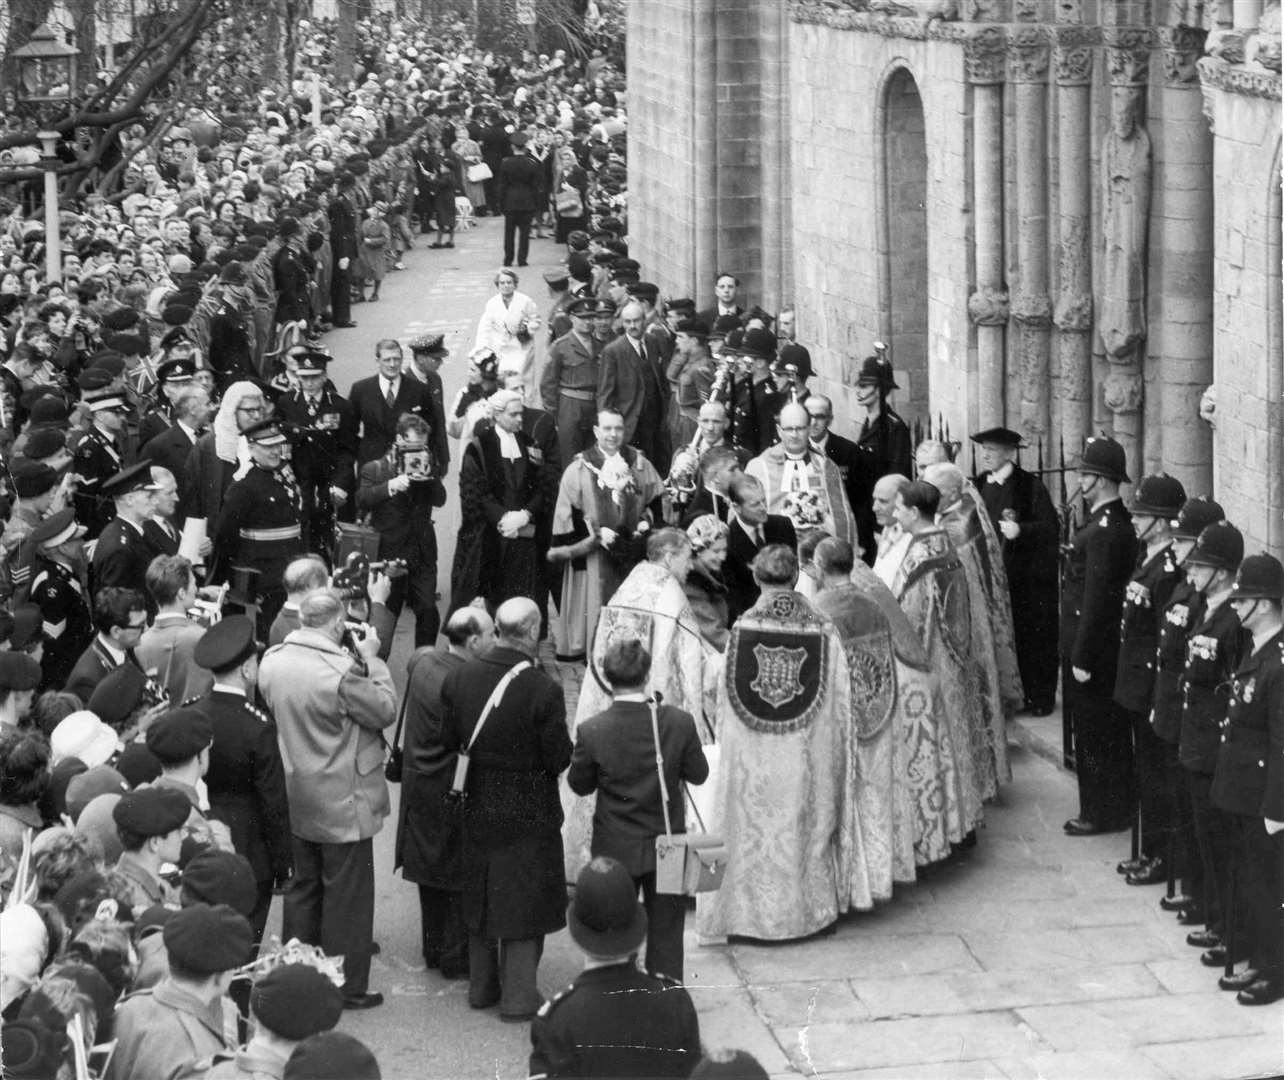 Huge crowds turned out to welcome the Queen and Prince Philip to Rochester for the Maundy service in the cathedral in March 1961. The couple walked from the Guildhall along the high street to the cathedral for the distribution of the Maundy money. The Queen is seen here with the Mayor of Rochester, Cllr I J Phillips